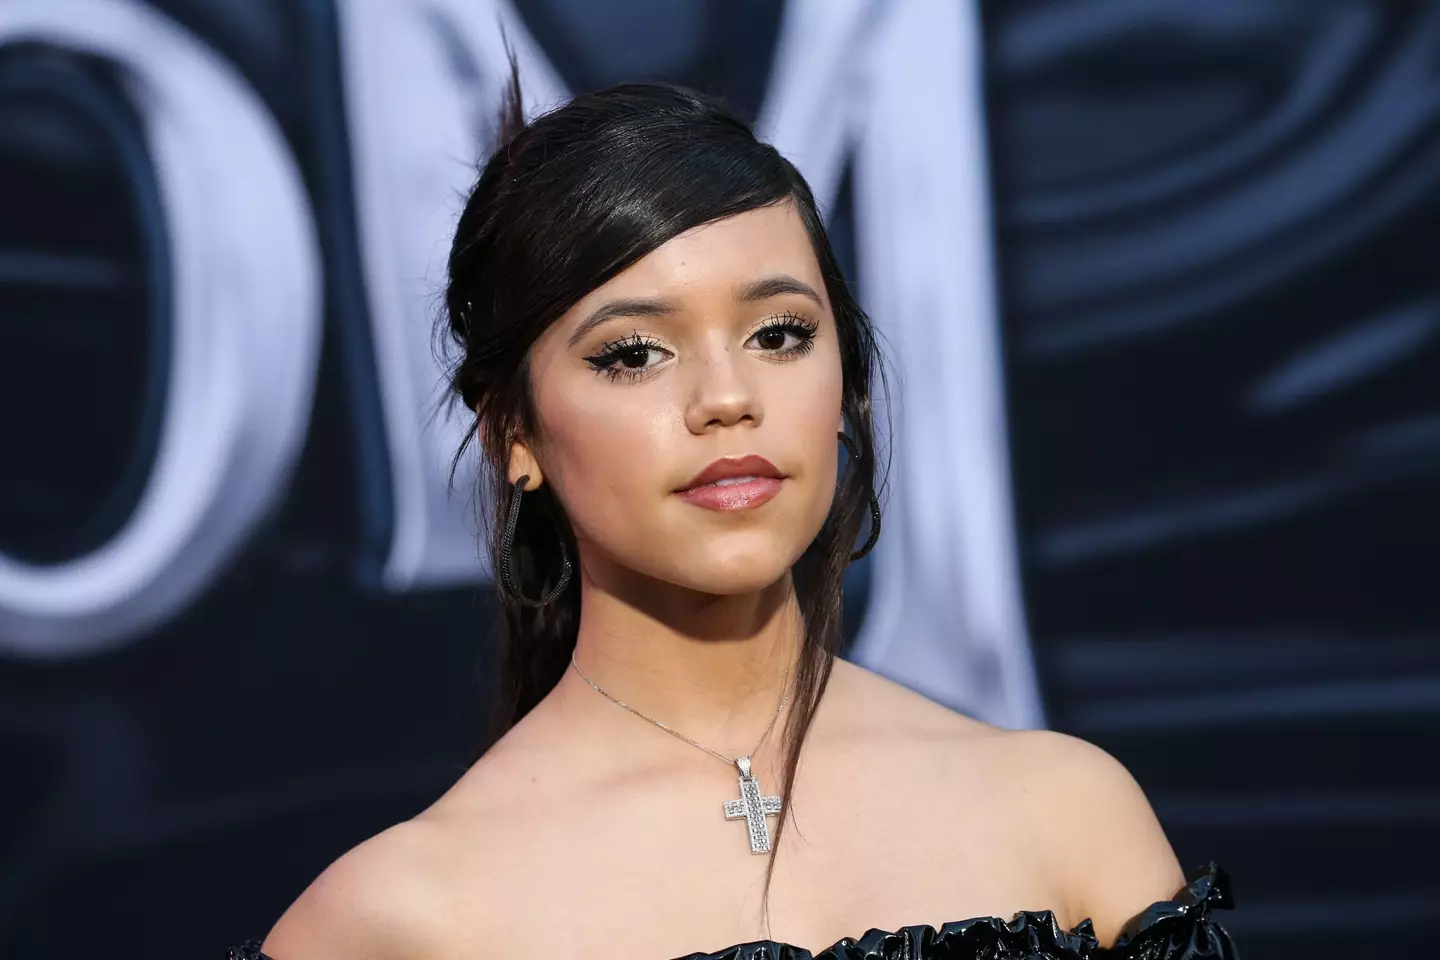 Jenna Ortega admitted to becoming obsessed with her roles.